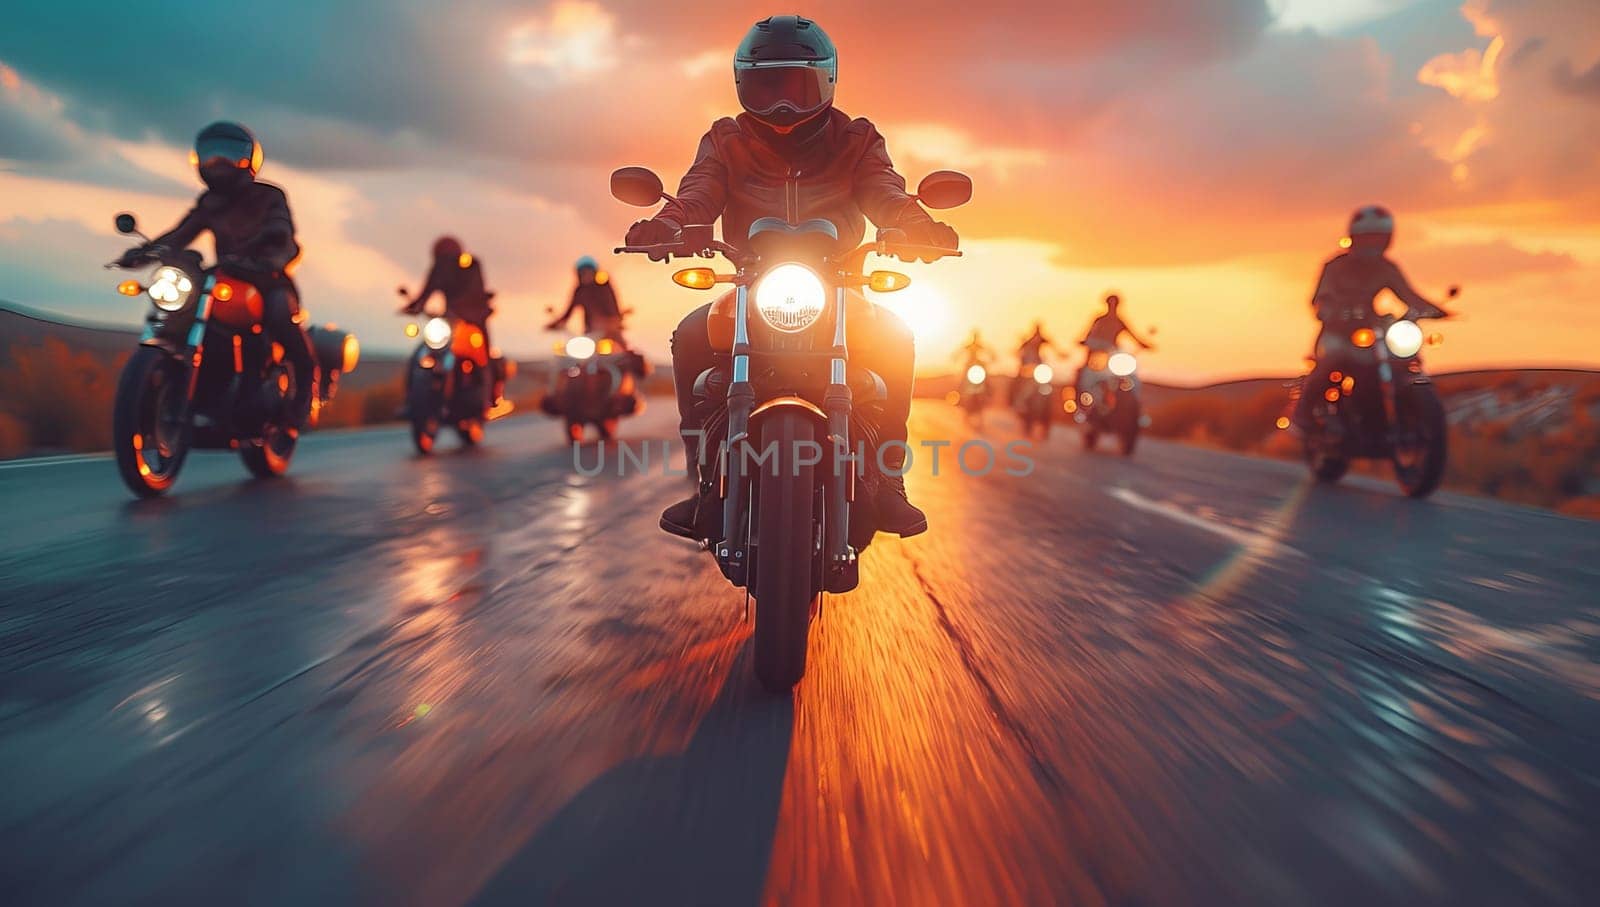 Motorcyclists riding on the road at sunset. Biker on a motorcycle. by ailike